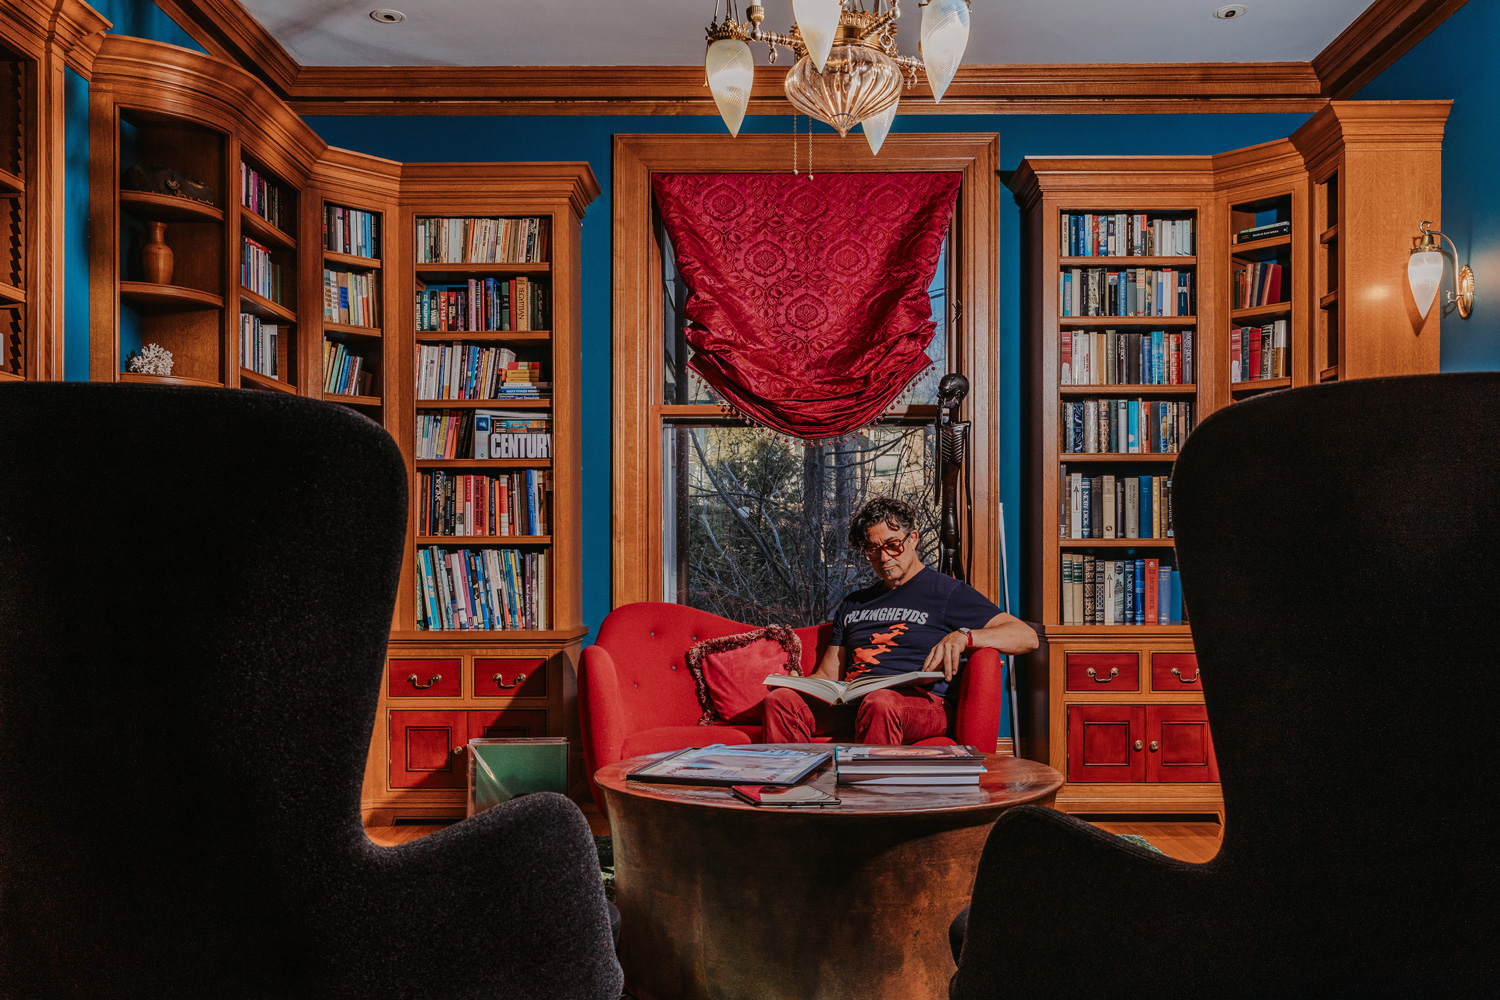 Derrick Rossi, the founder of Moderna, in his home